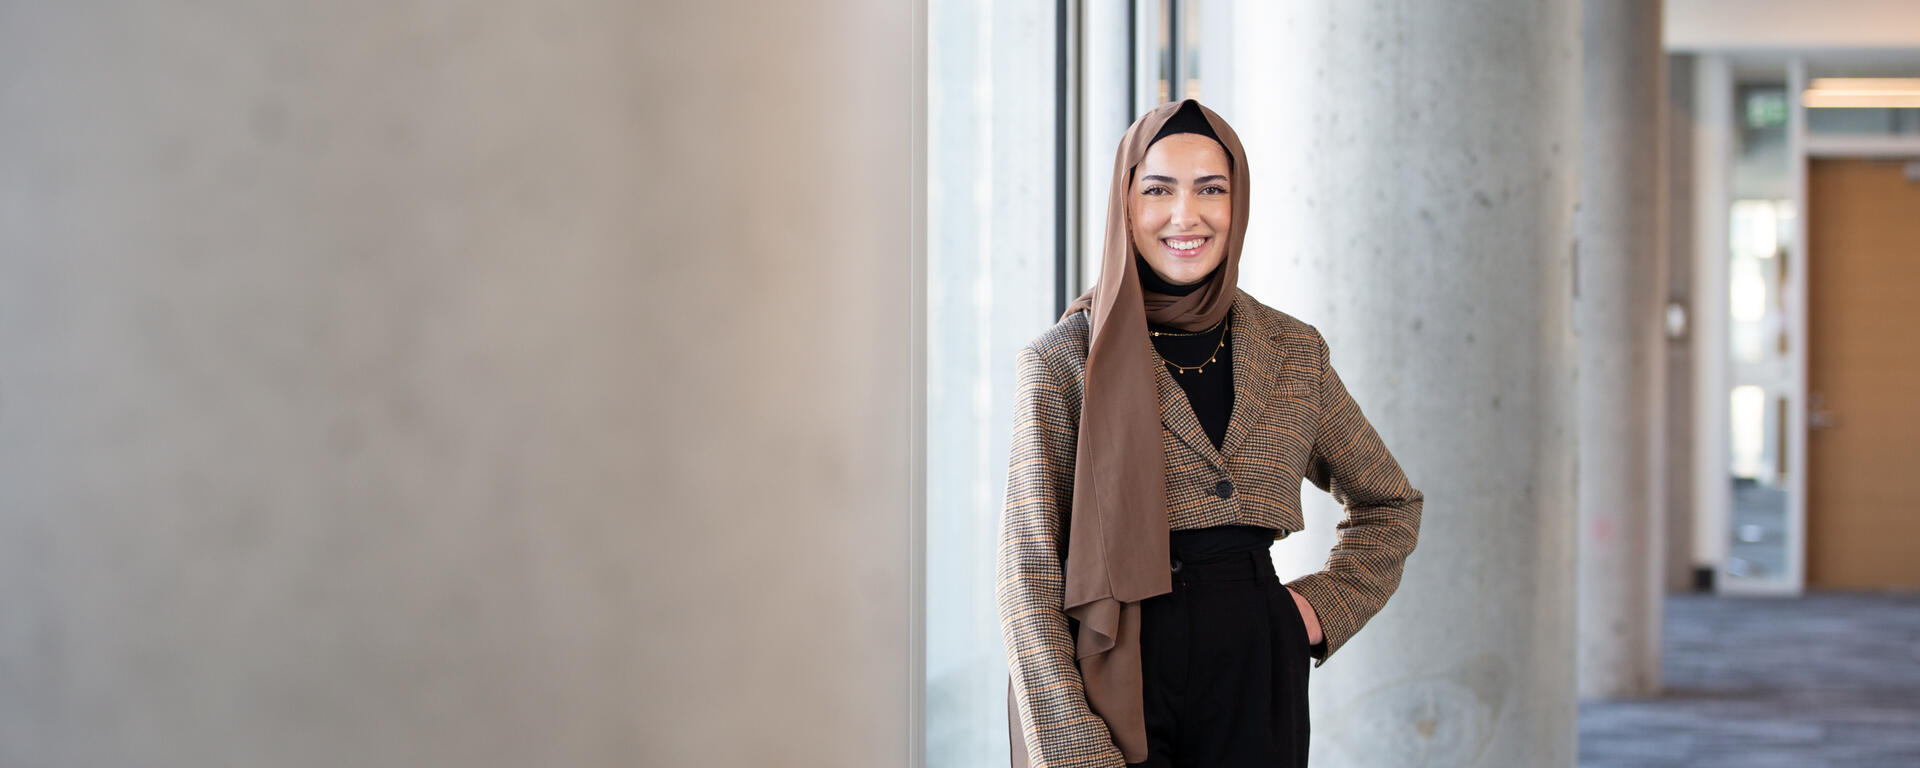 Communications and Media student in the Faculty of Arts, Asma Bernier,  wrote her honours thesis about hijabi fashion influencers and how these women defined "modesty" via their online platforms